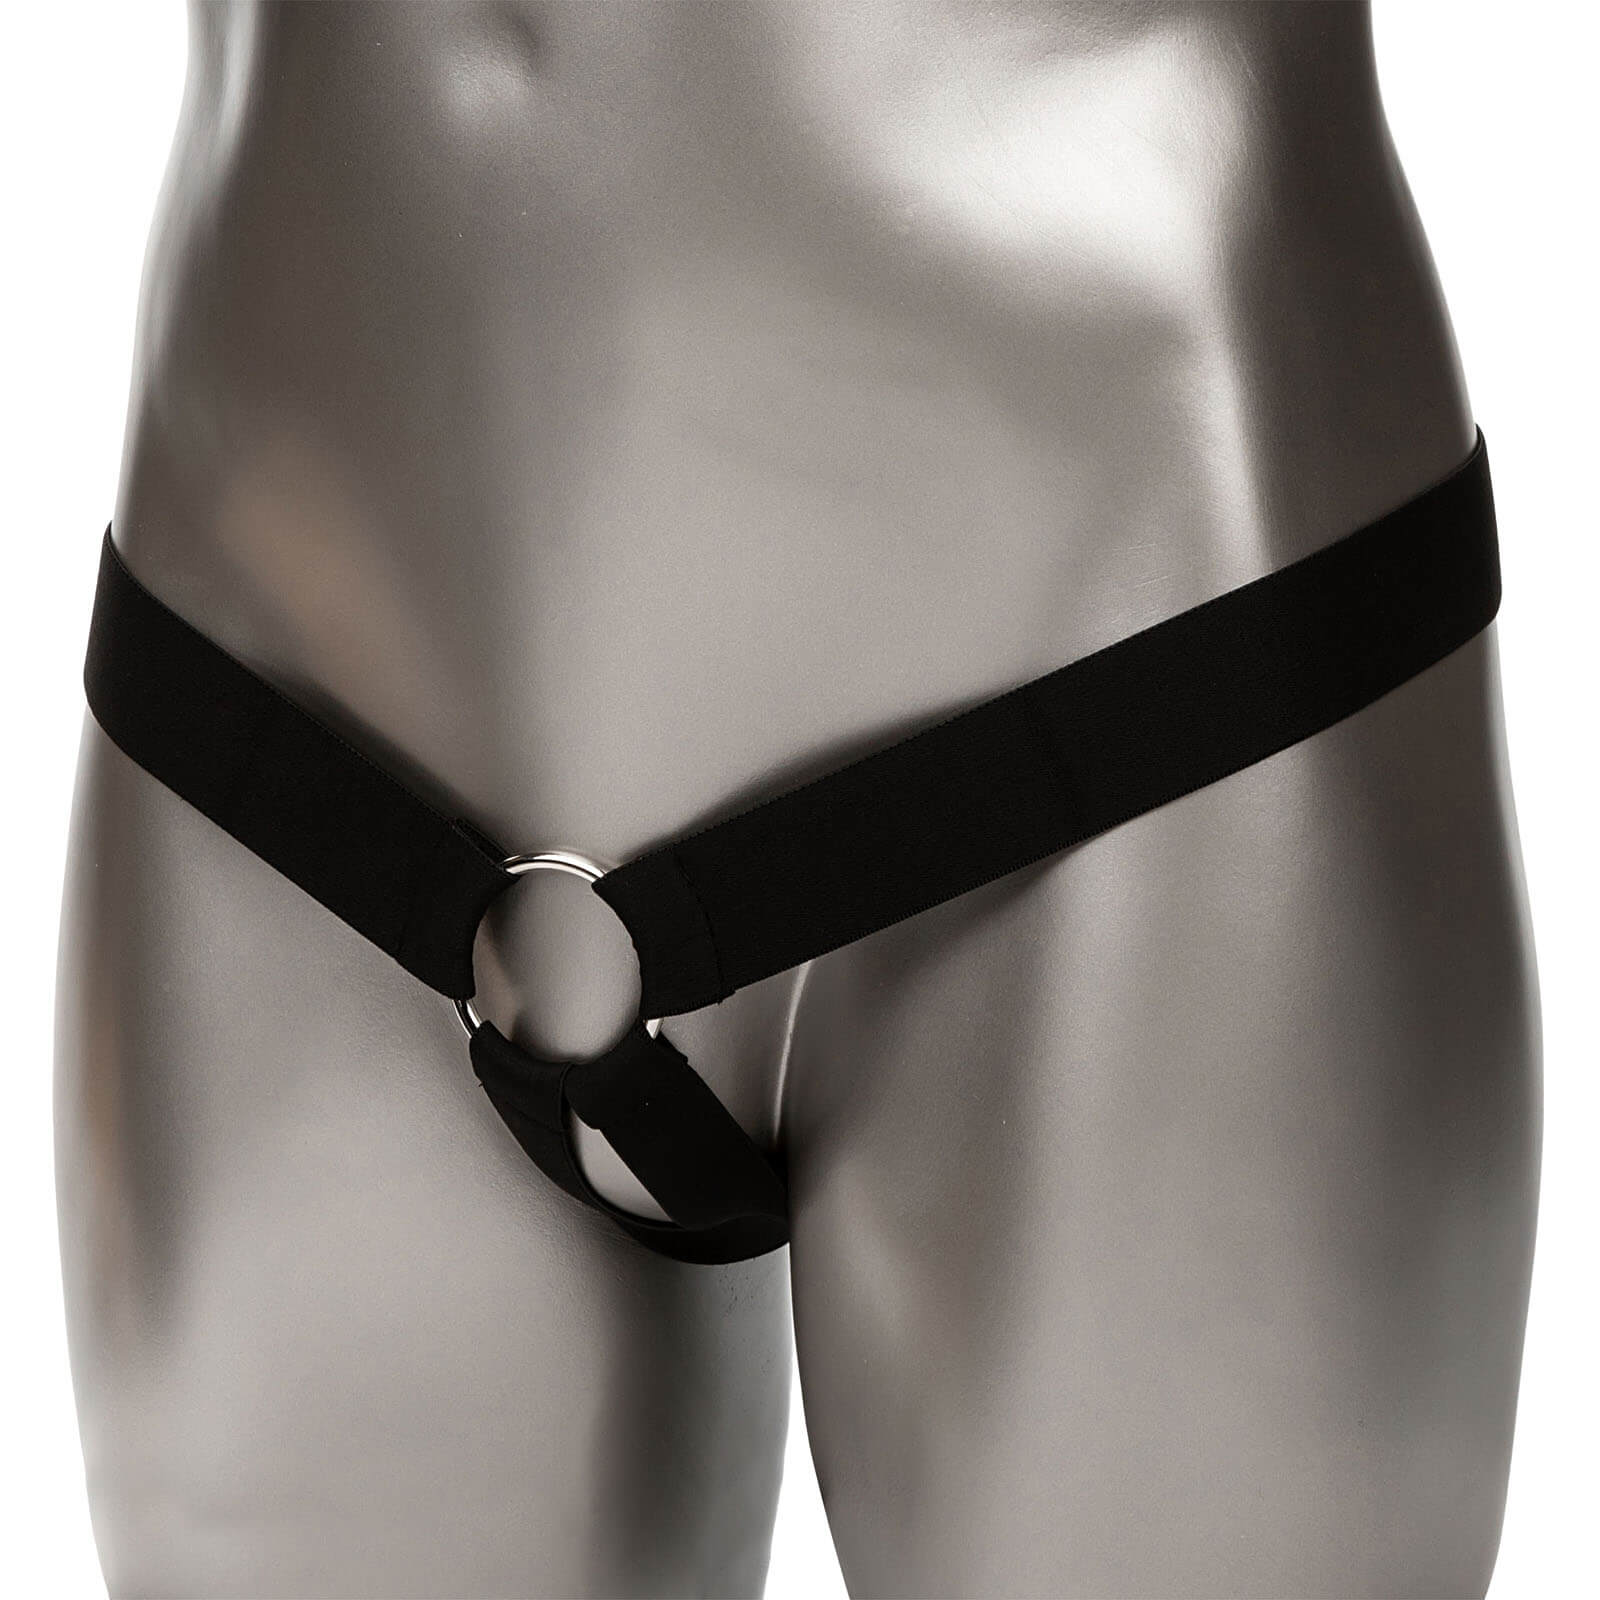 Strap on penis CalExotics Maxx Extension with Harness (Brown)